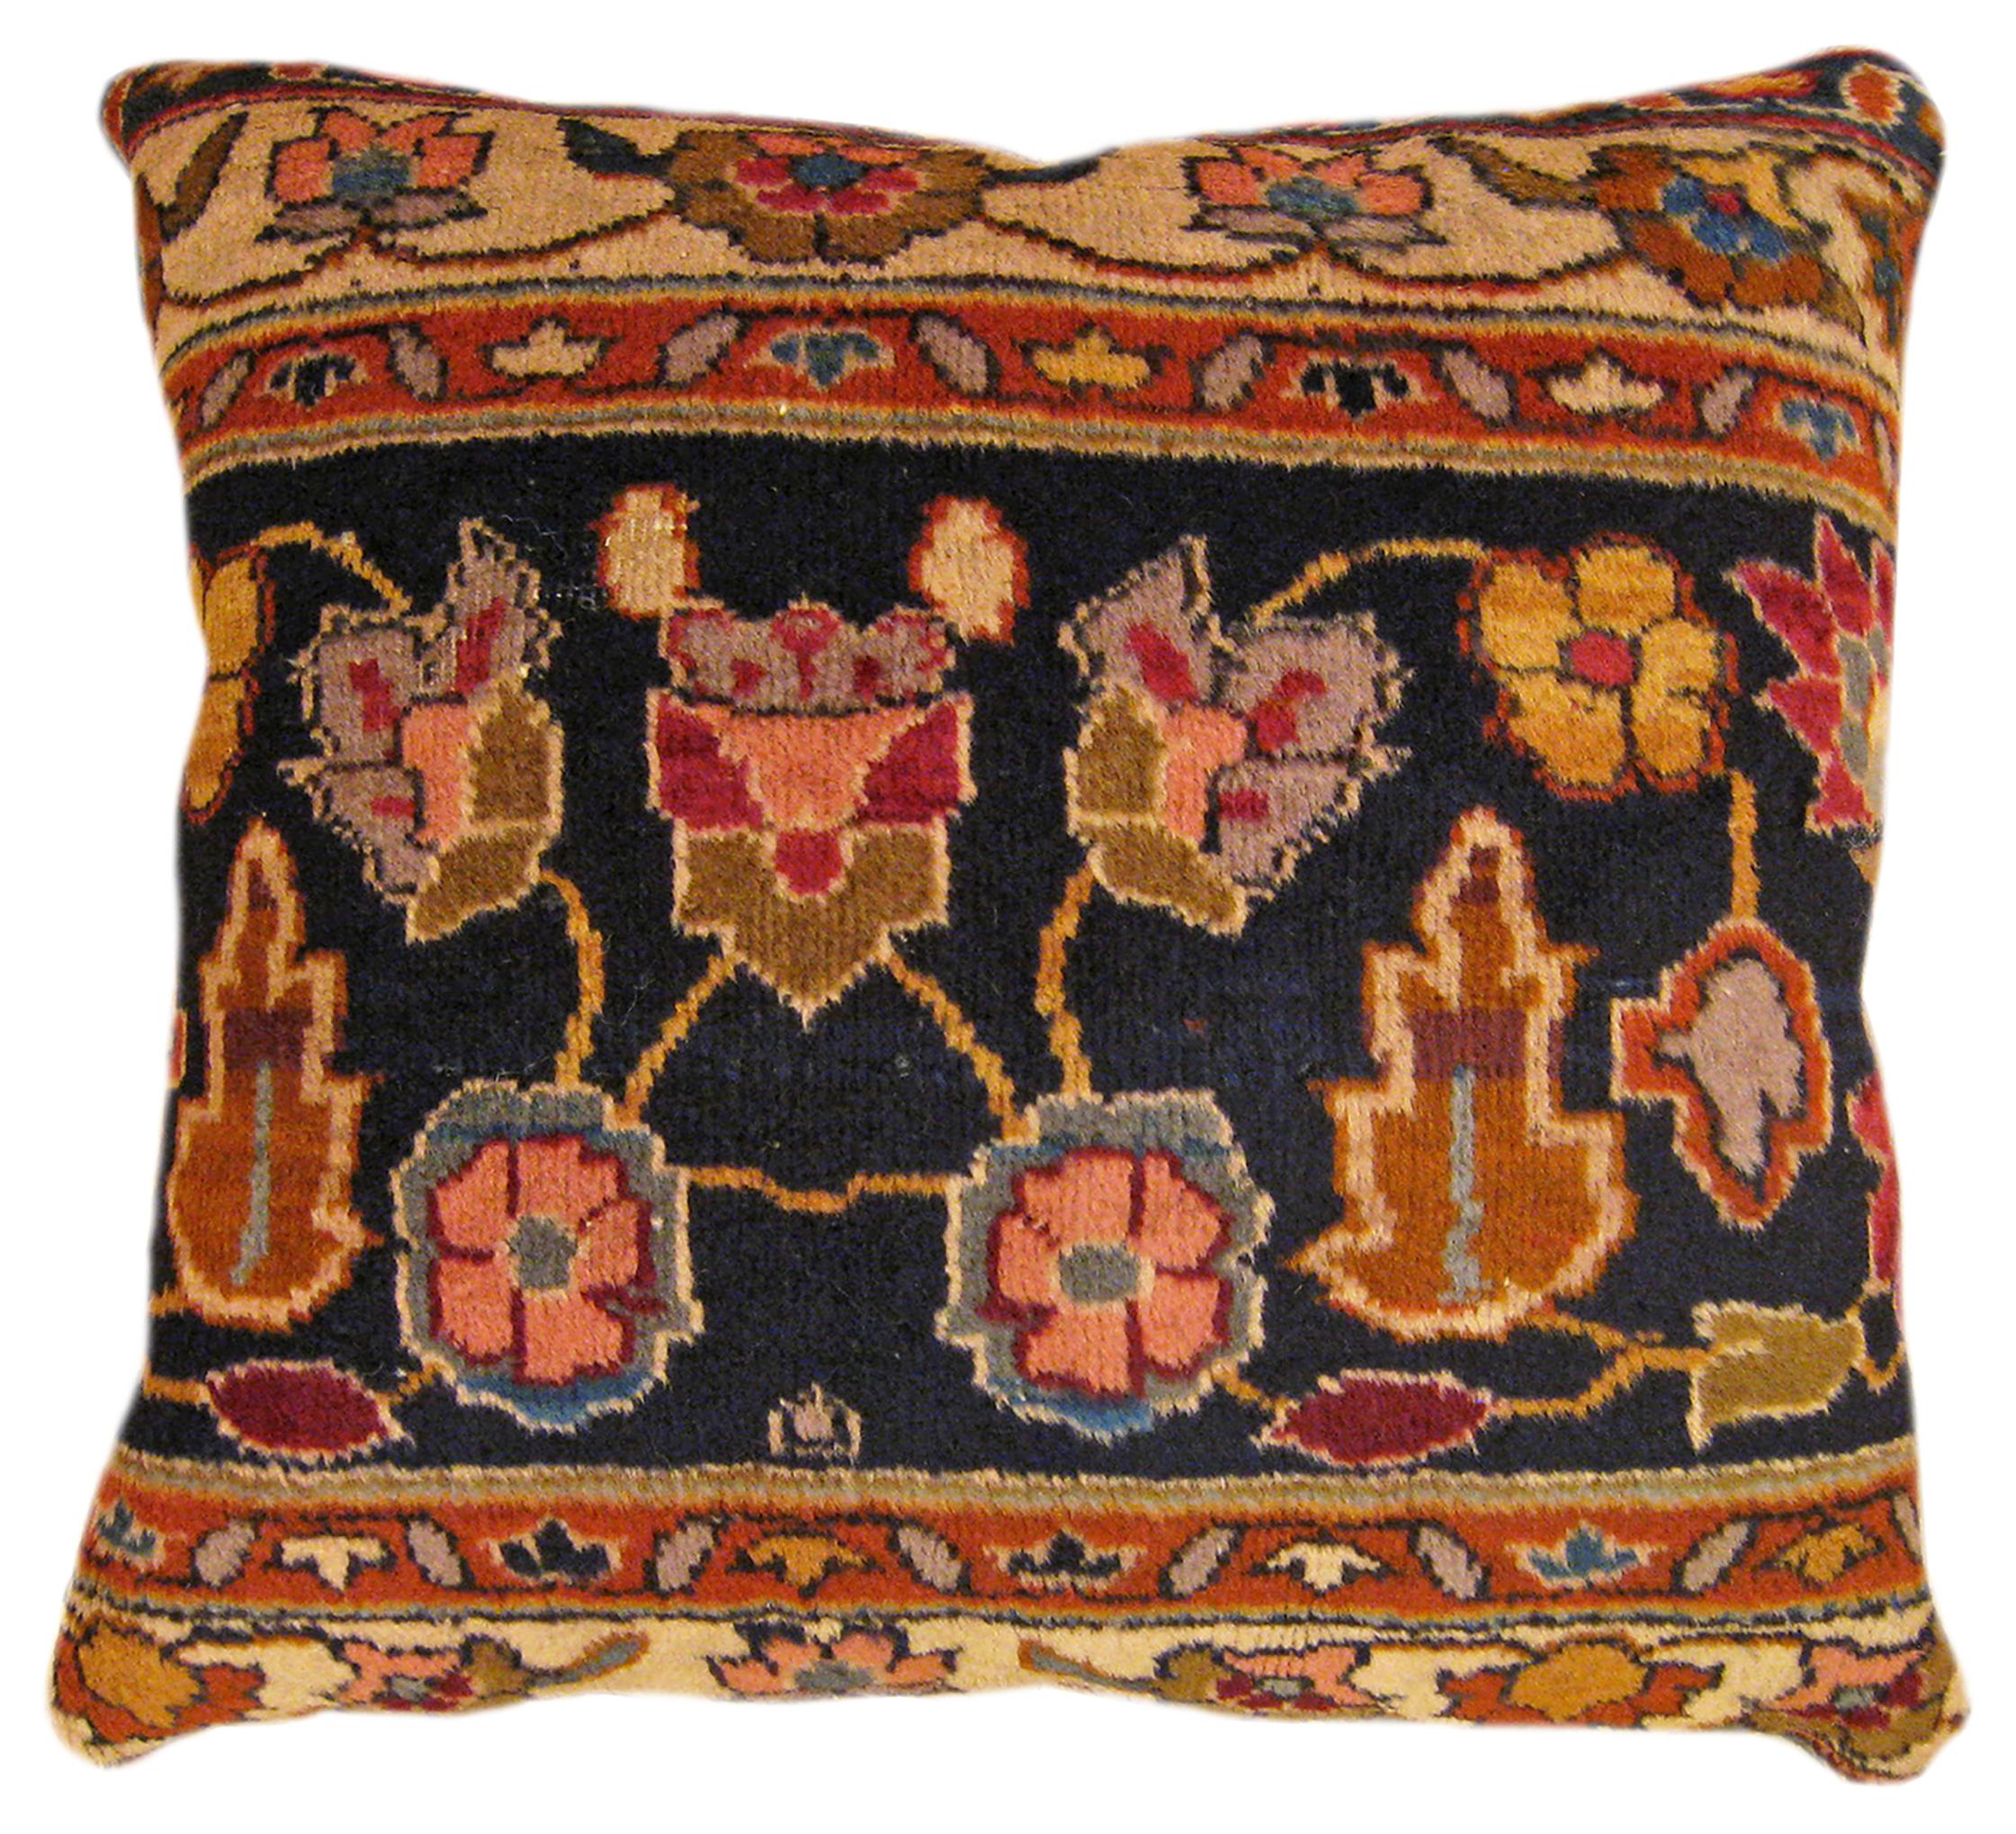 Early 20th Century Pair of Decorative Antique Indian Agra Rug Pillows with Floral Elements For Sale